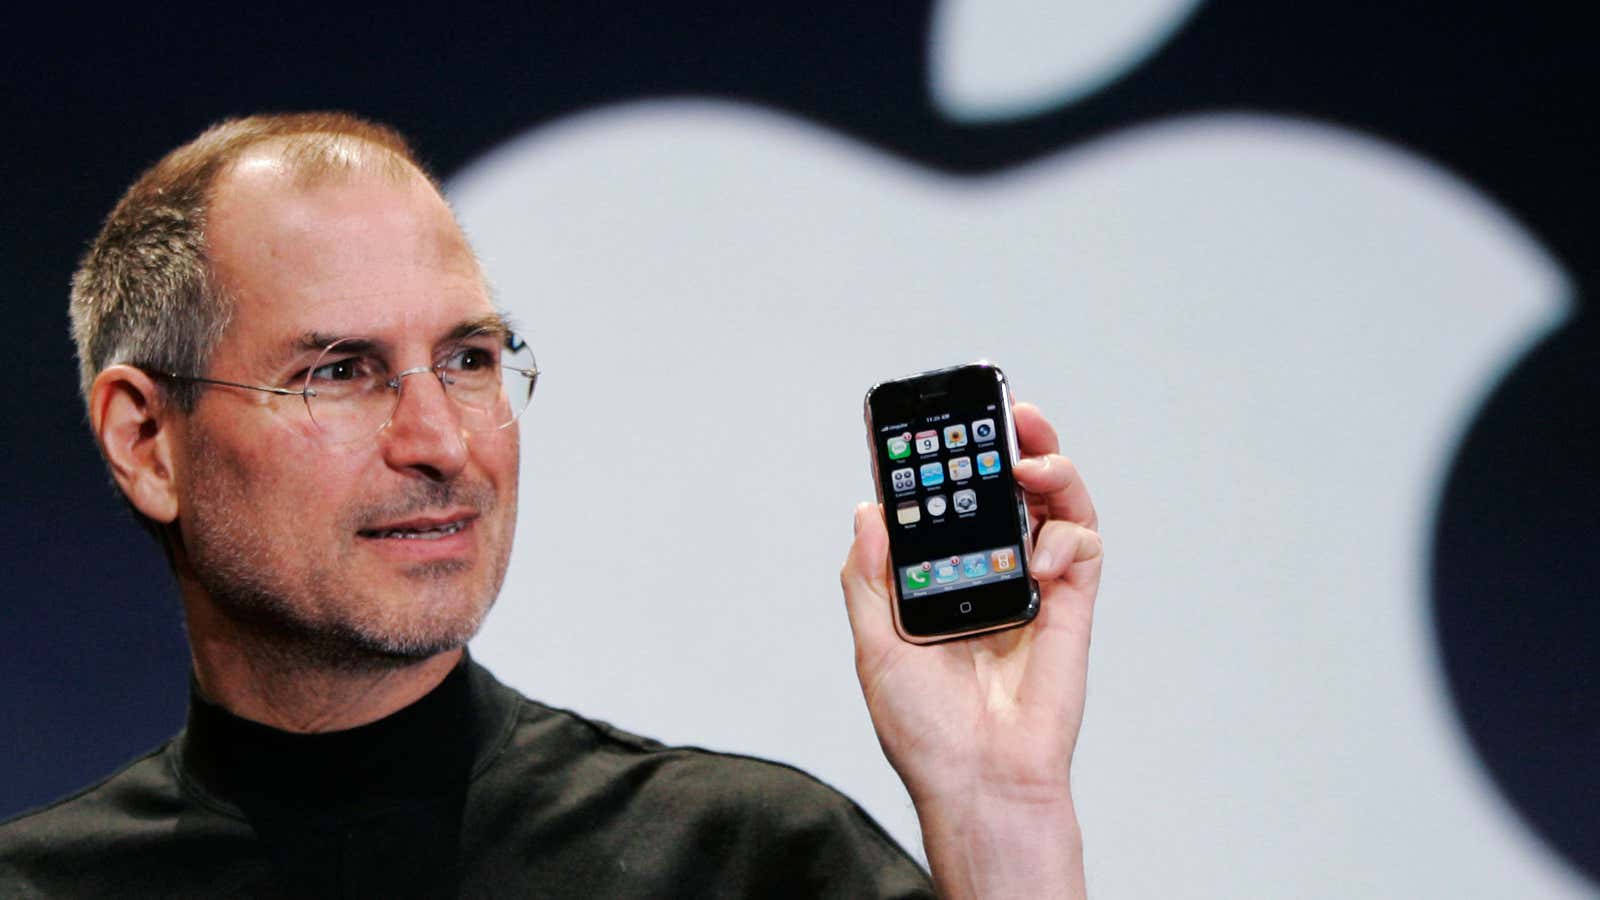 The first-generation iPhone was on Edge.